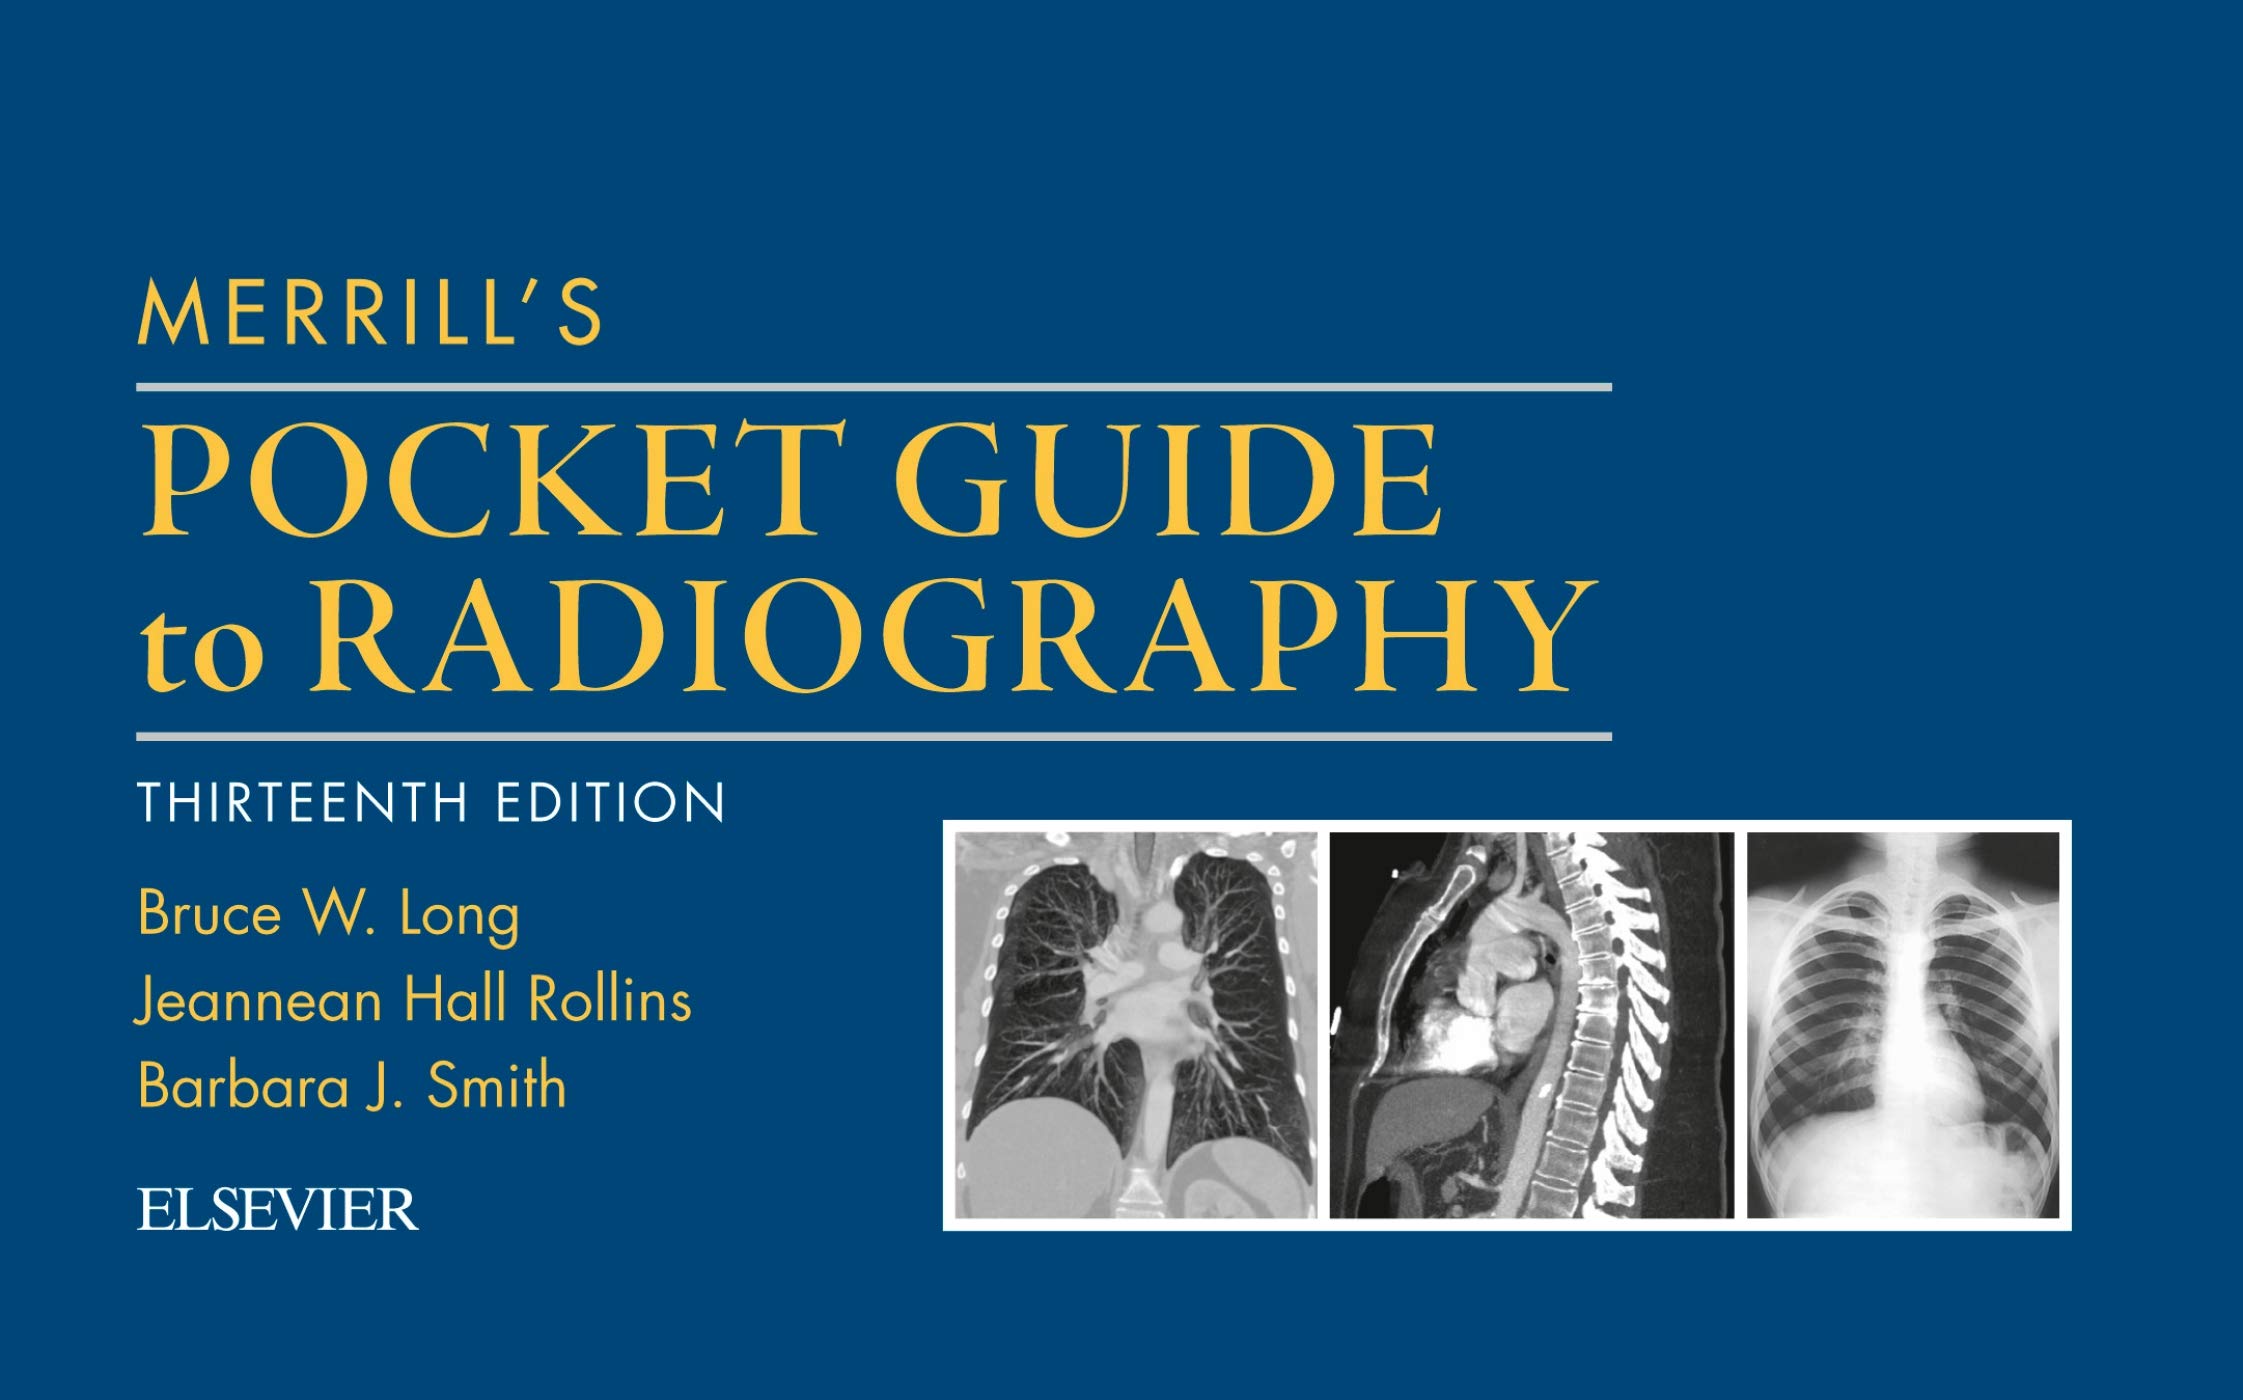 Merrill's pocket guide to radiography